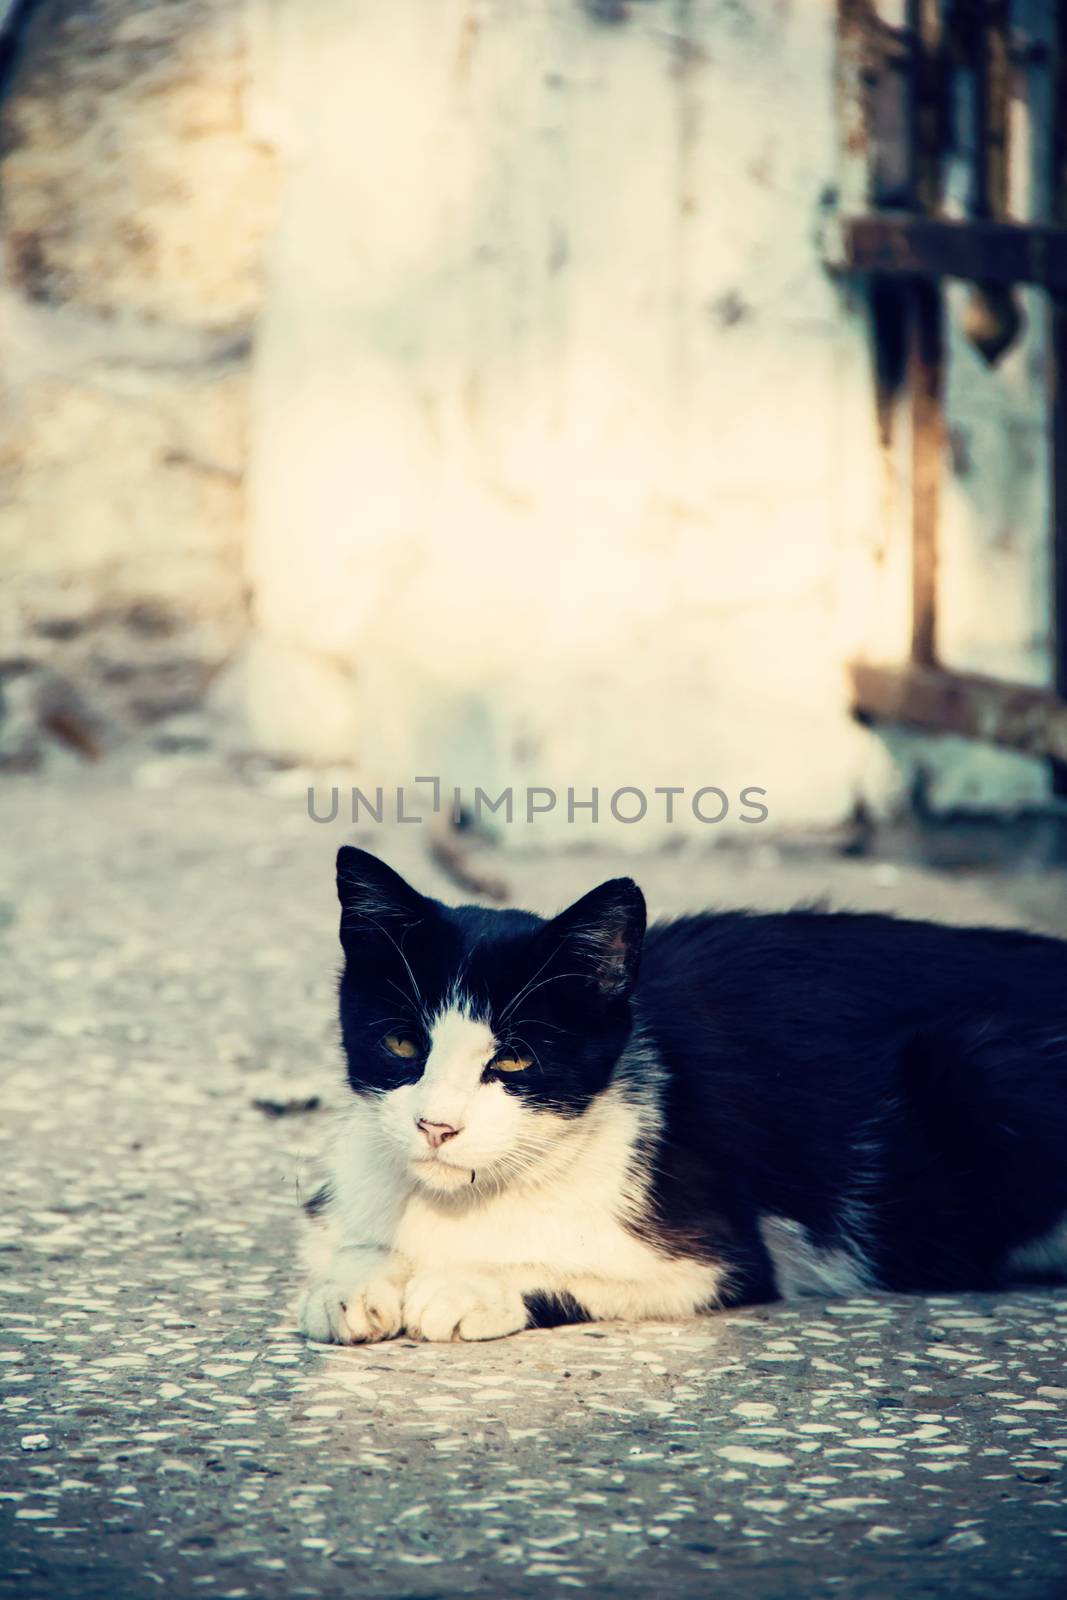  black and white  cat in the street